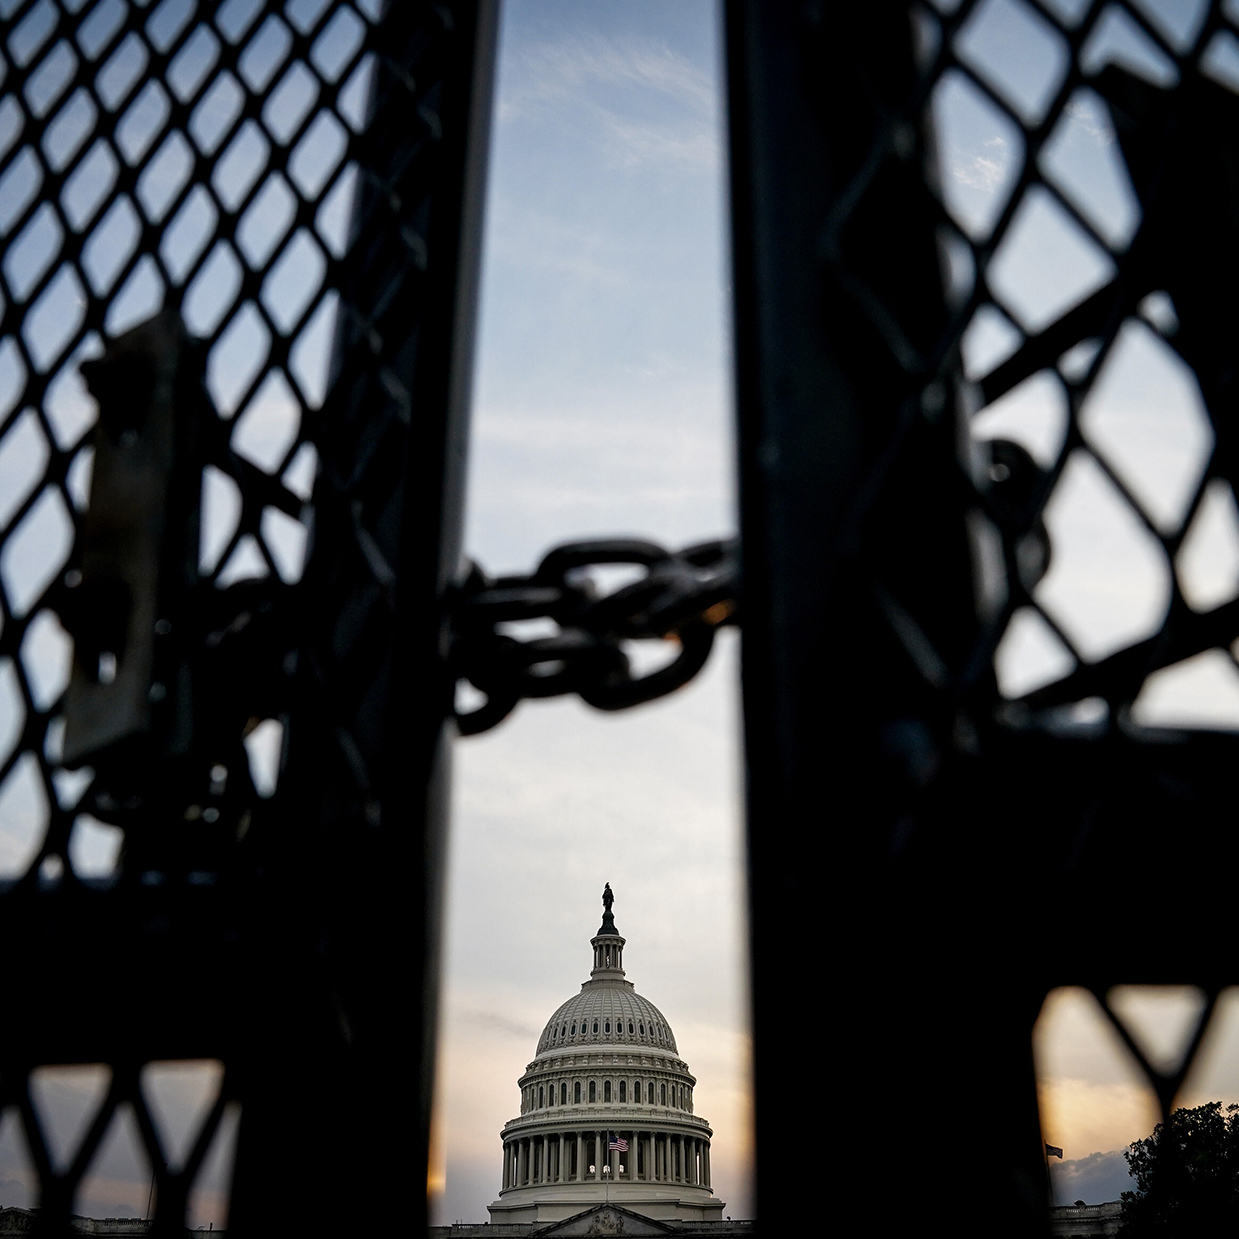 Security fencing surrounds the Capitol ahead of President Joe Biden's address to a joint session of Congress in Washington on Wednesday, April 28, 2021. (Erin Schaff/The New York Times)